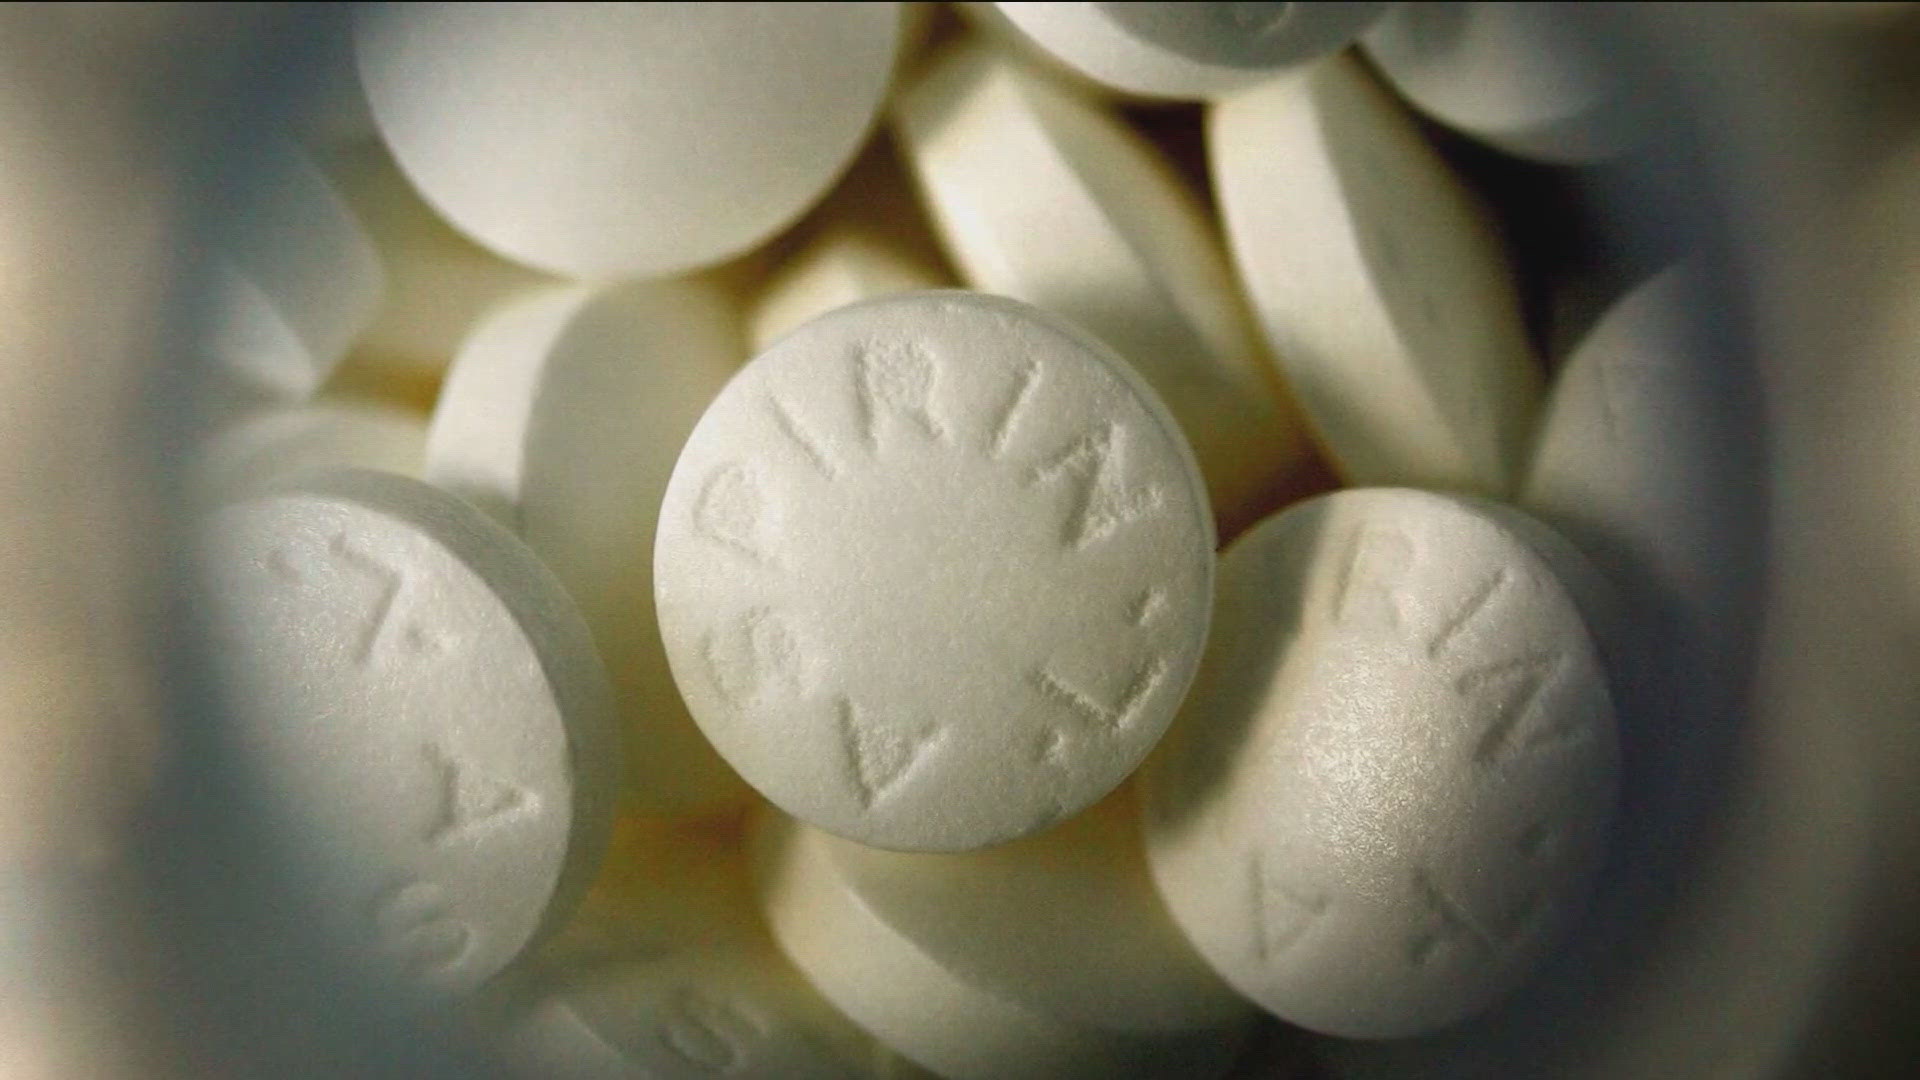 Experts explain the potential dangers of taking aspirin daily without medical advice.